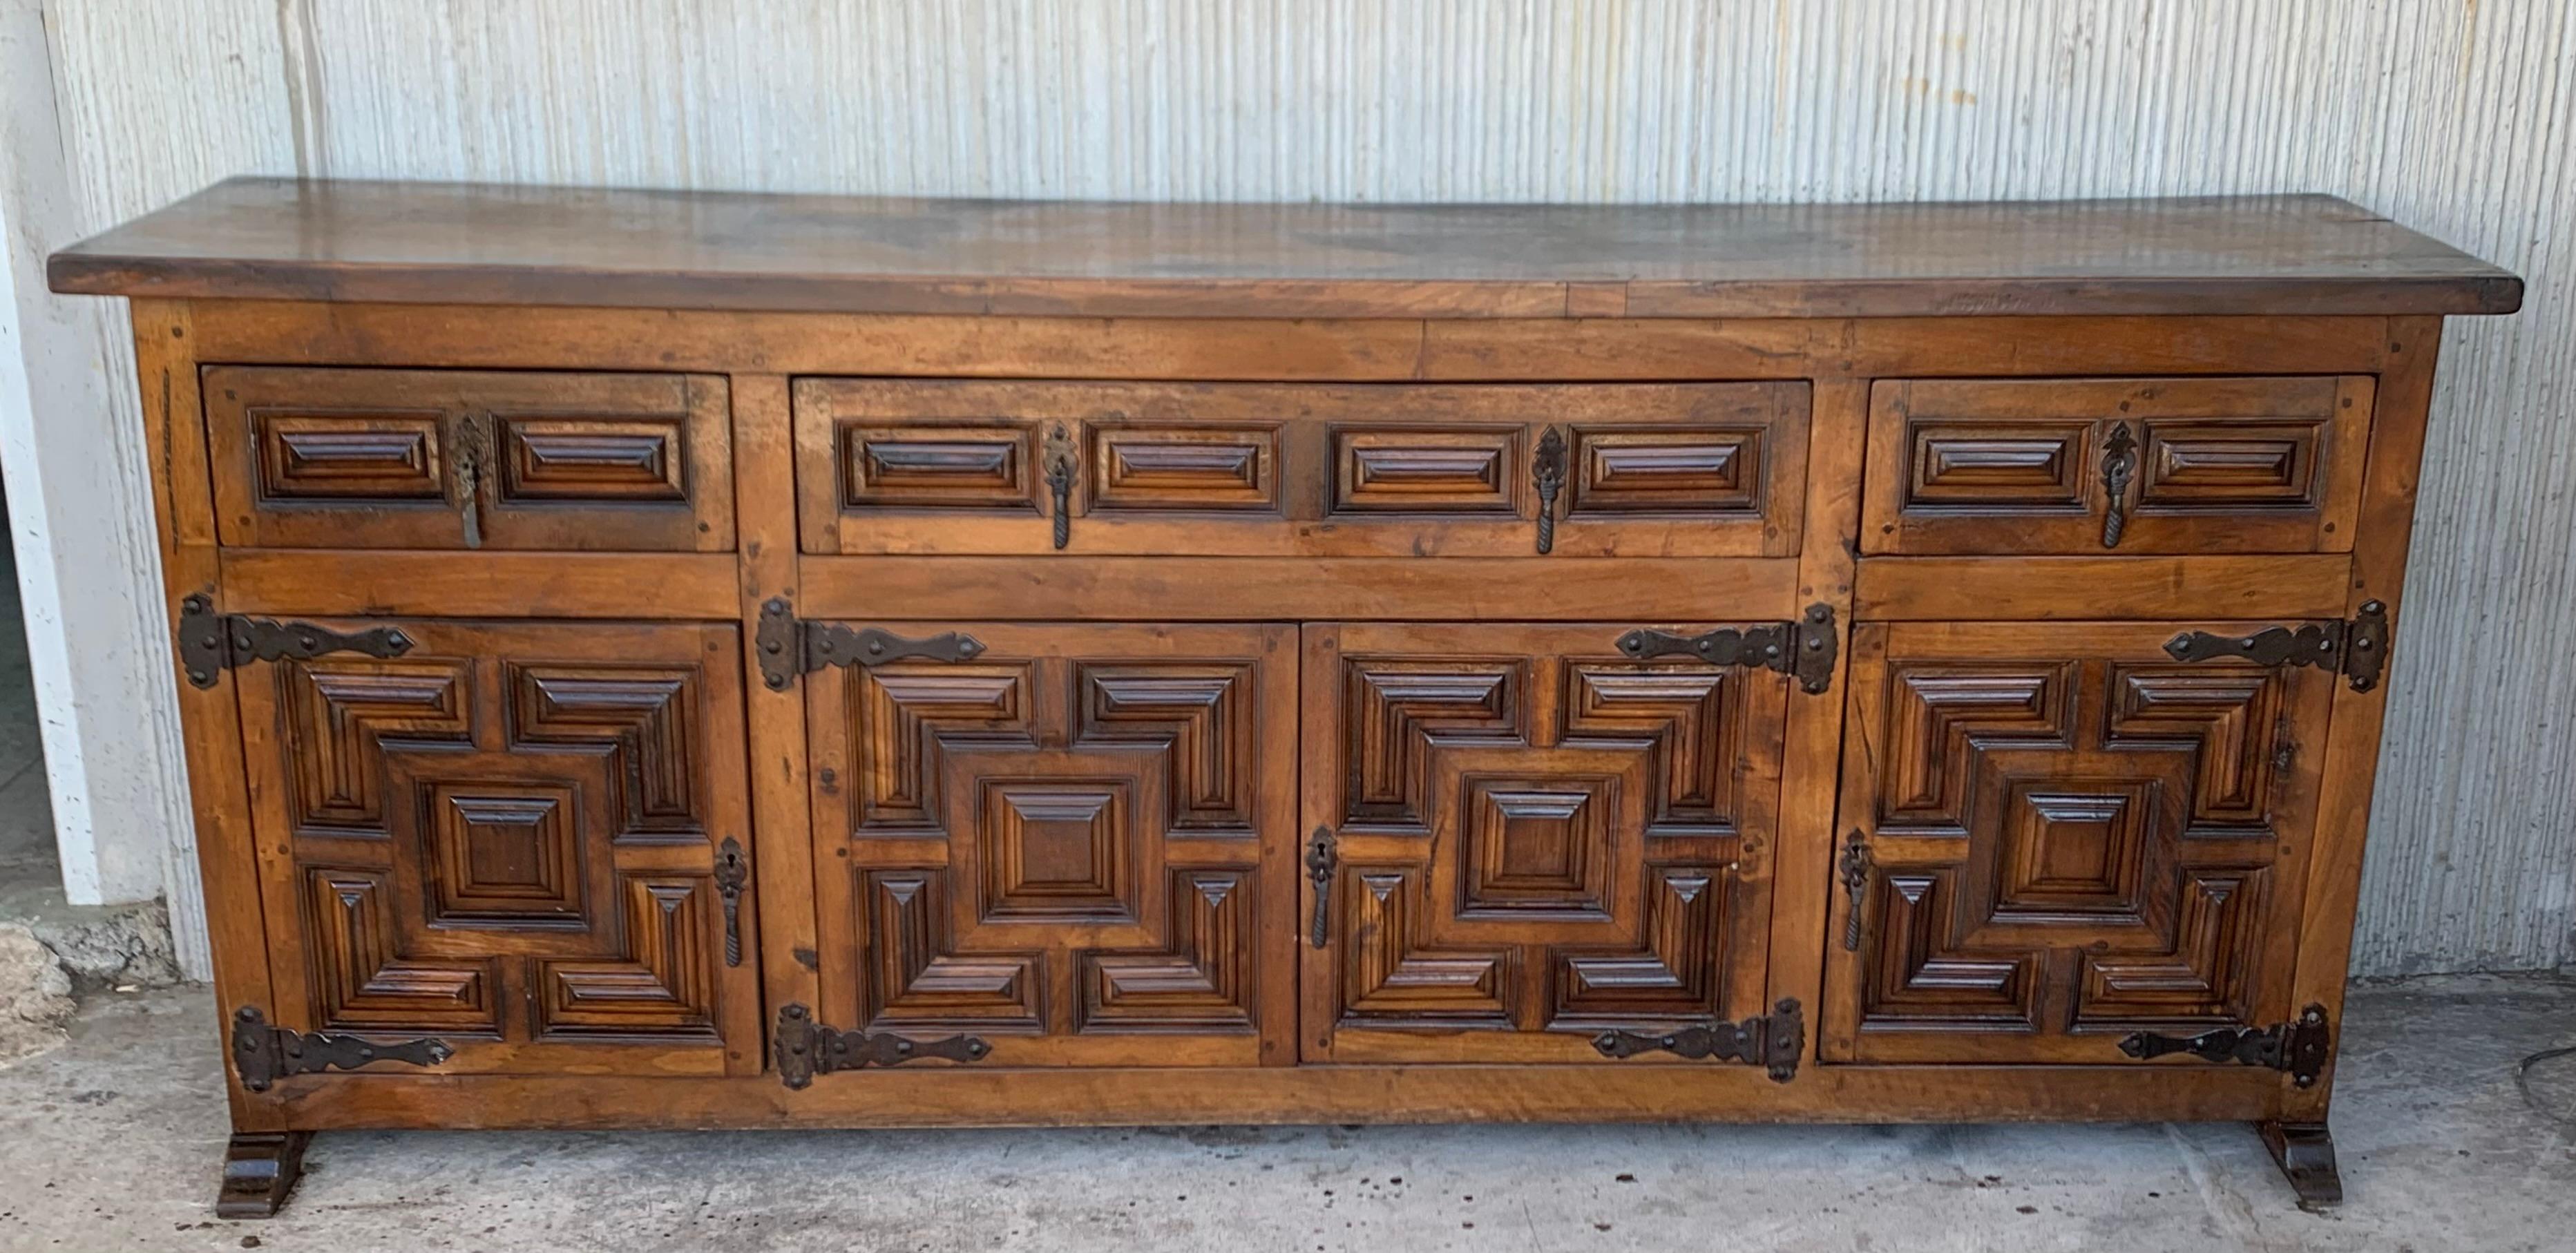 From Northern Spain, constructed of solid oak, the rectangular top with molded edge atop a conforming case housing three drawers over four doors, the doors paneled with solid walnut, raised on a plinth base.
Very heavy and original cabinet.
    